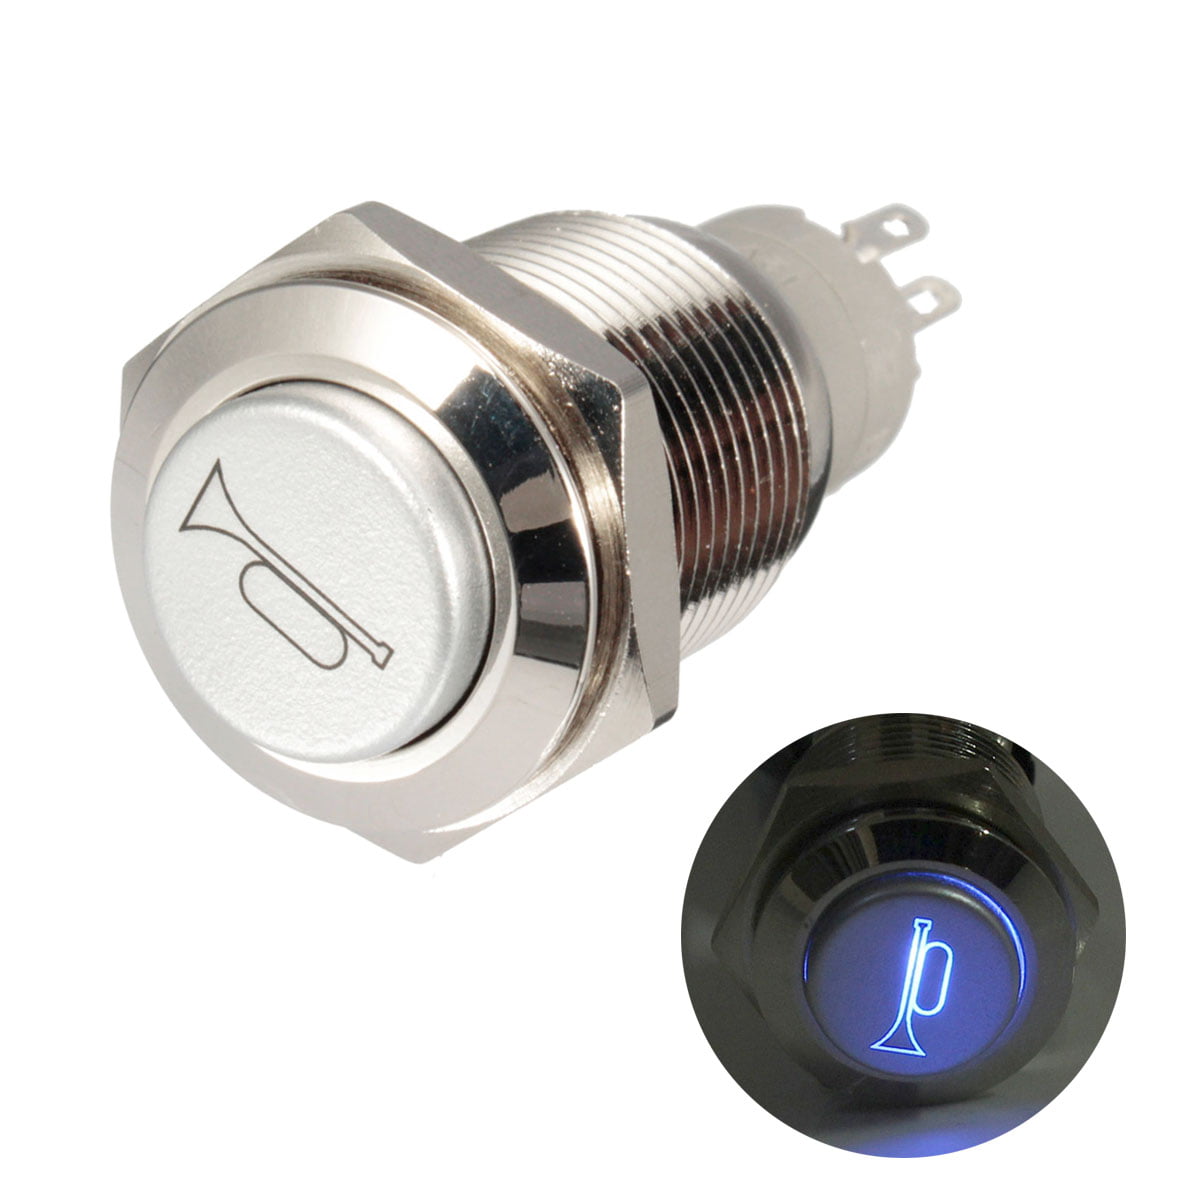 2 pcs 16mm Start Horn Momentary Stainless Steel Metal Push Button Switch K9 